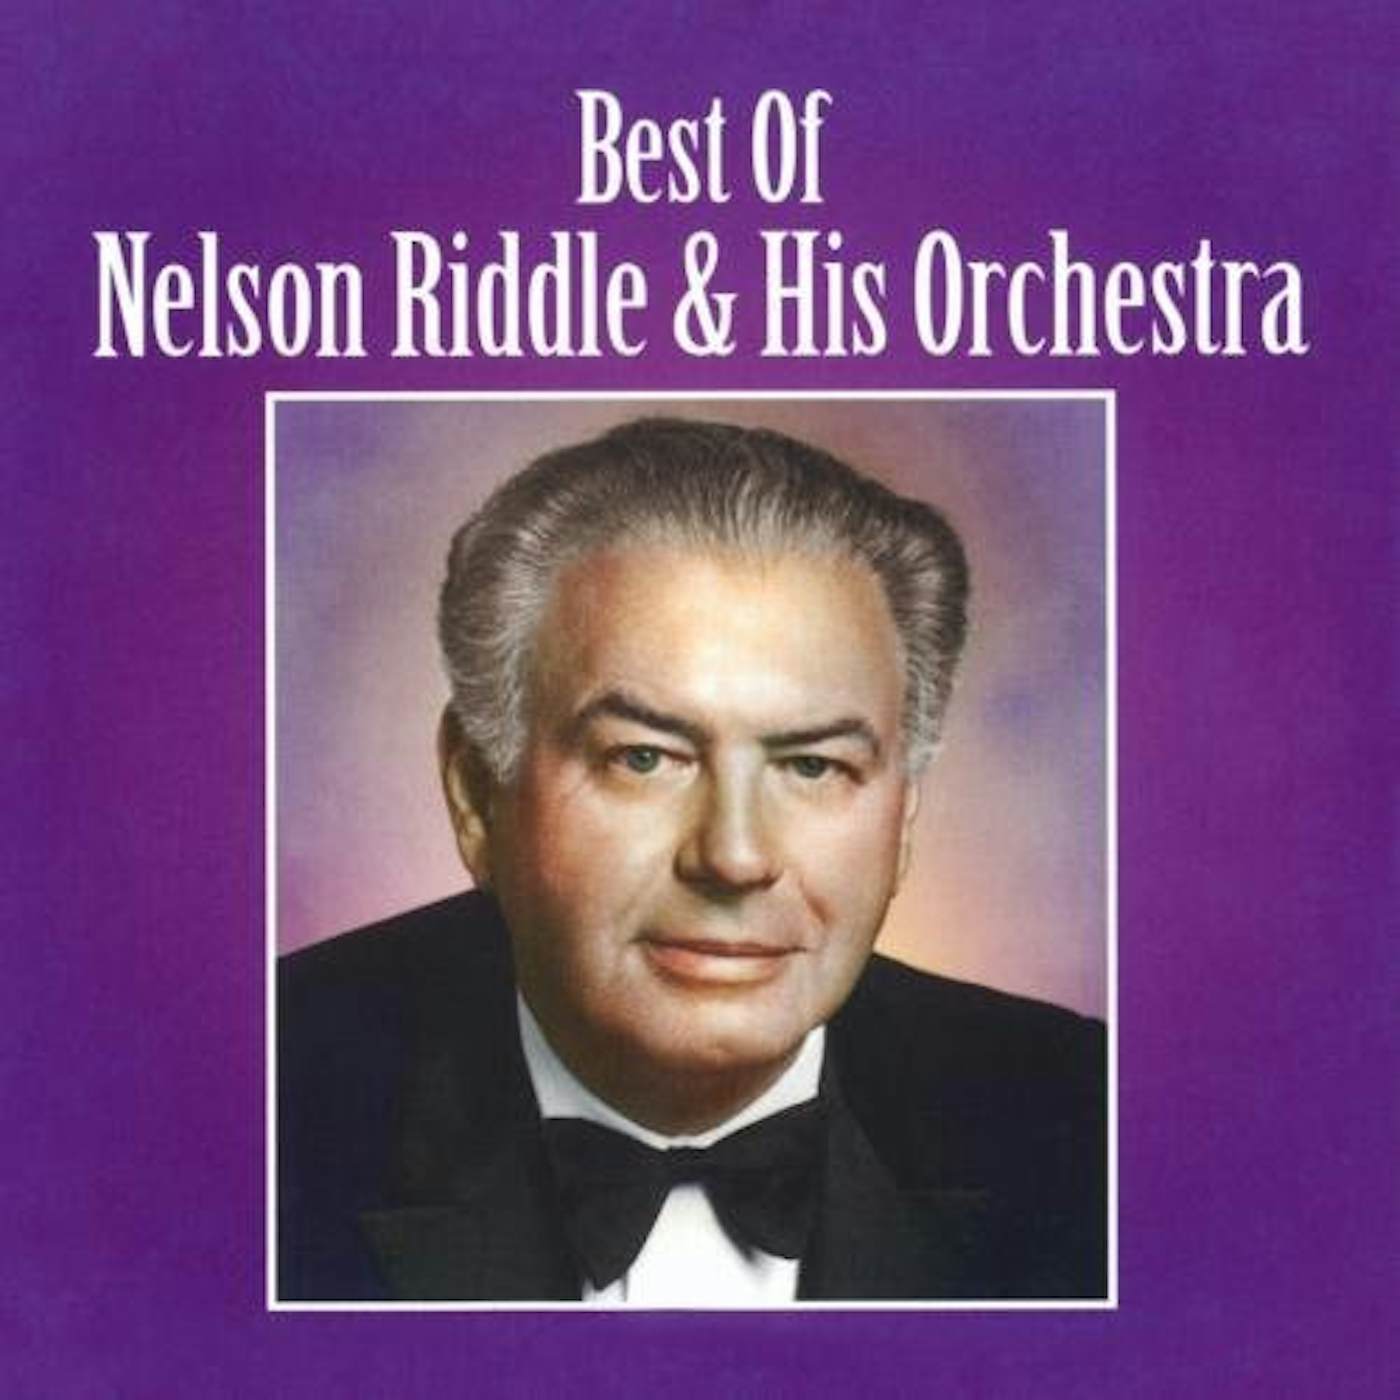 Nelson Riddle BEST OF CD